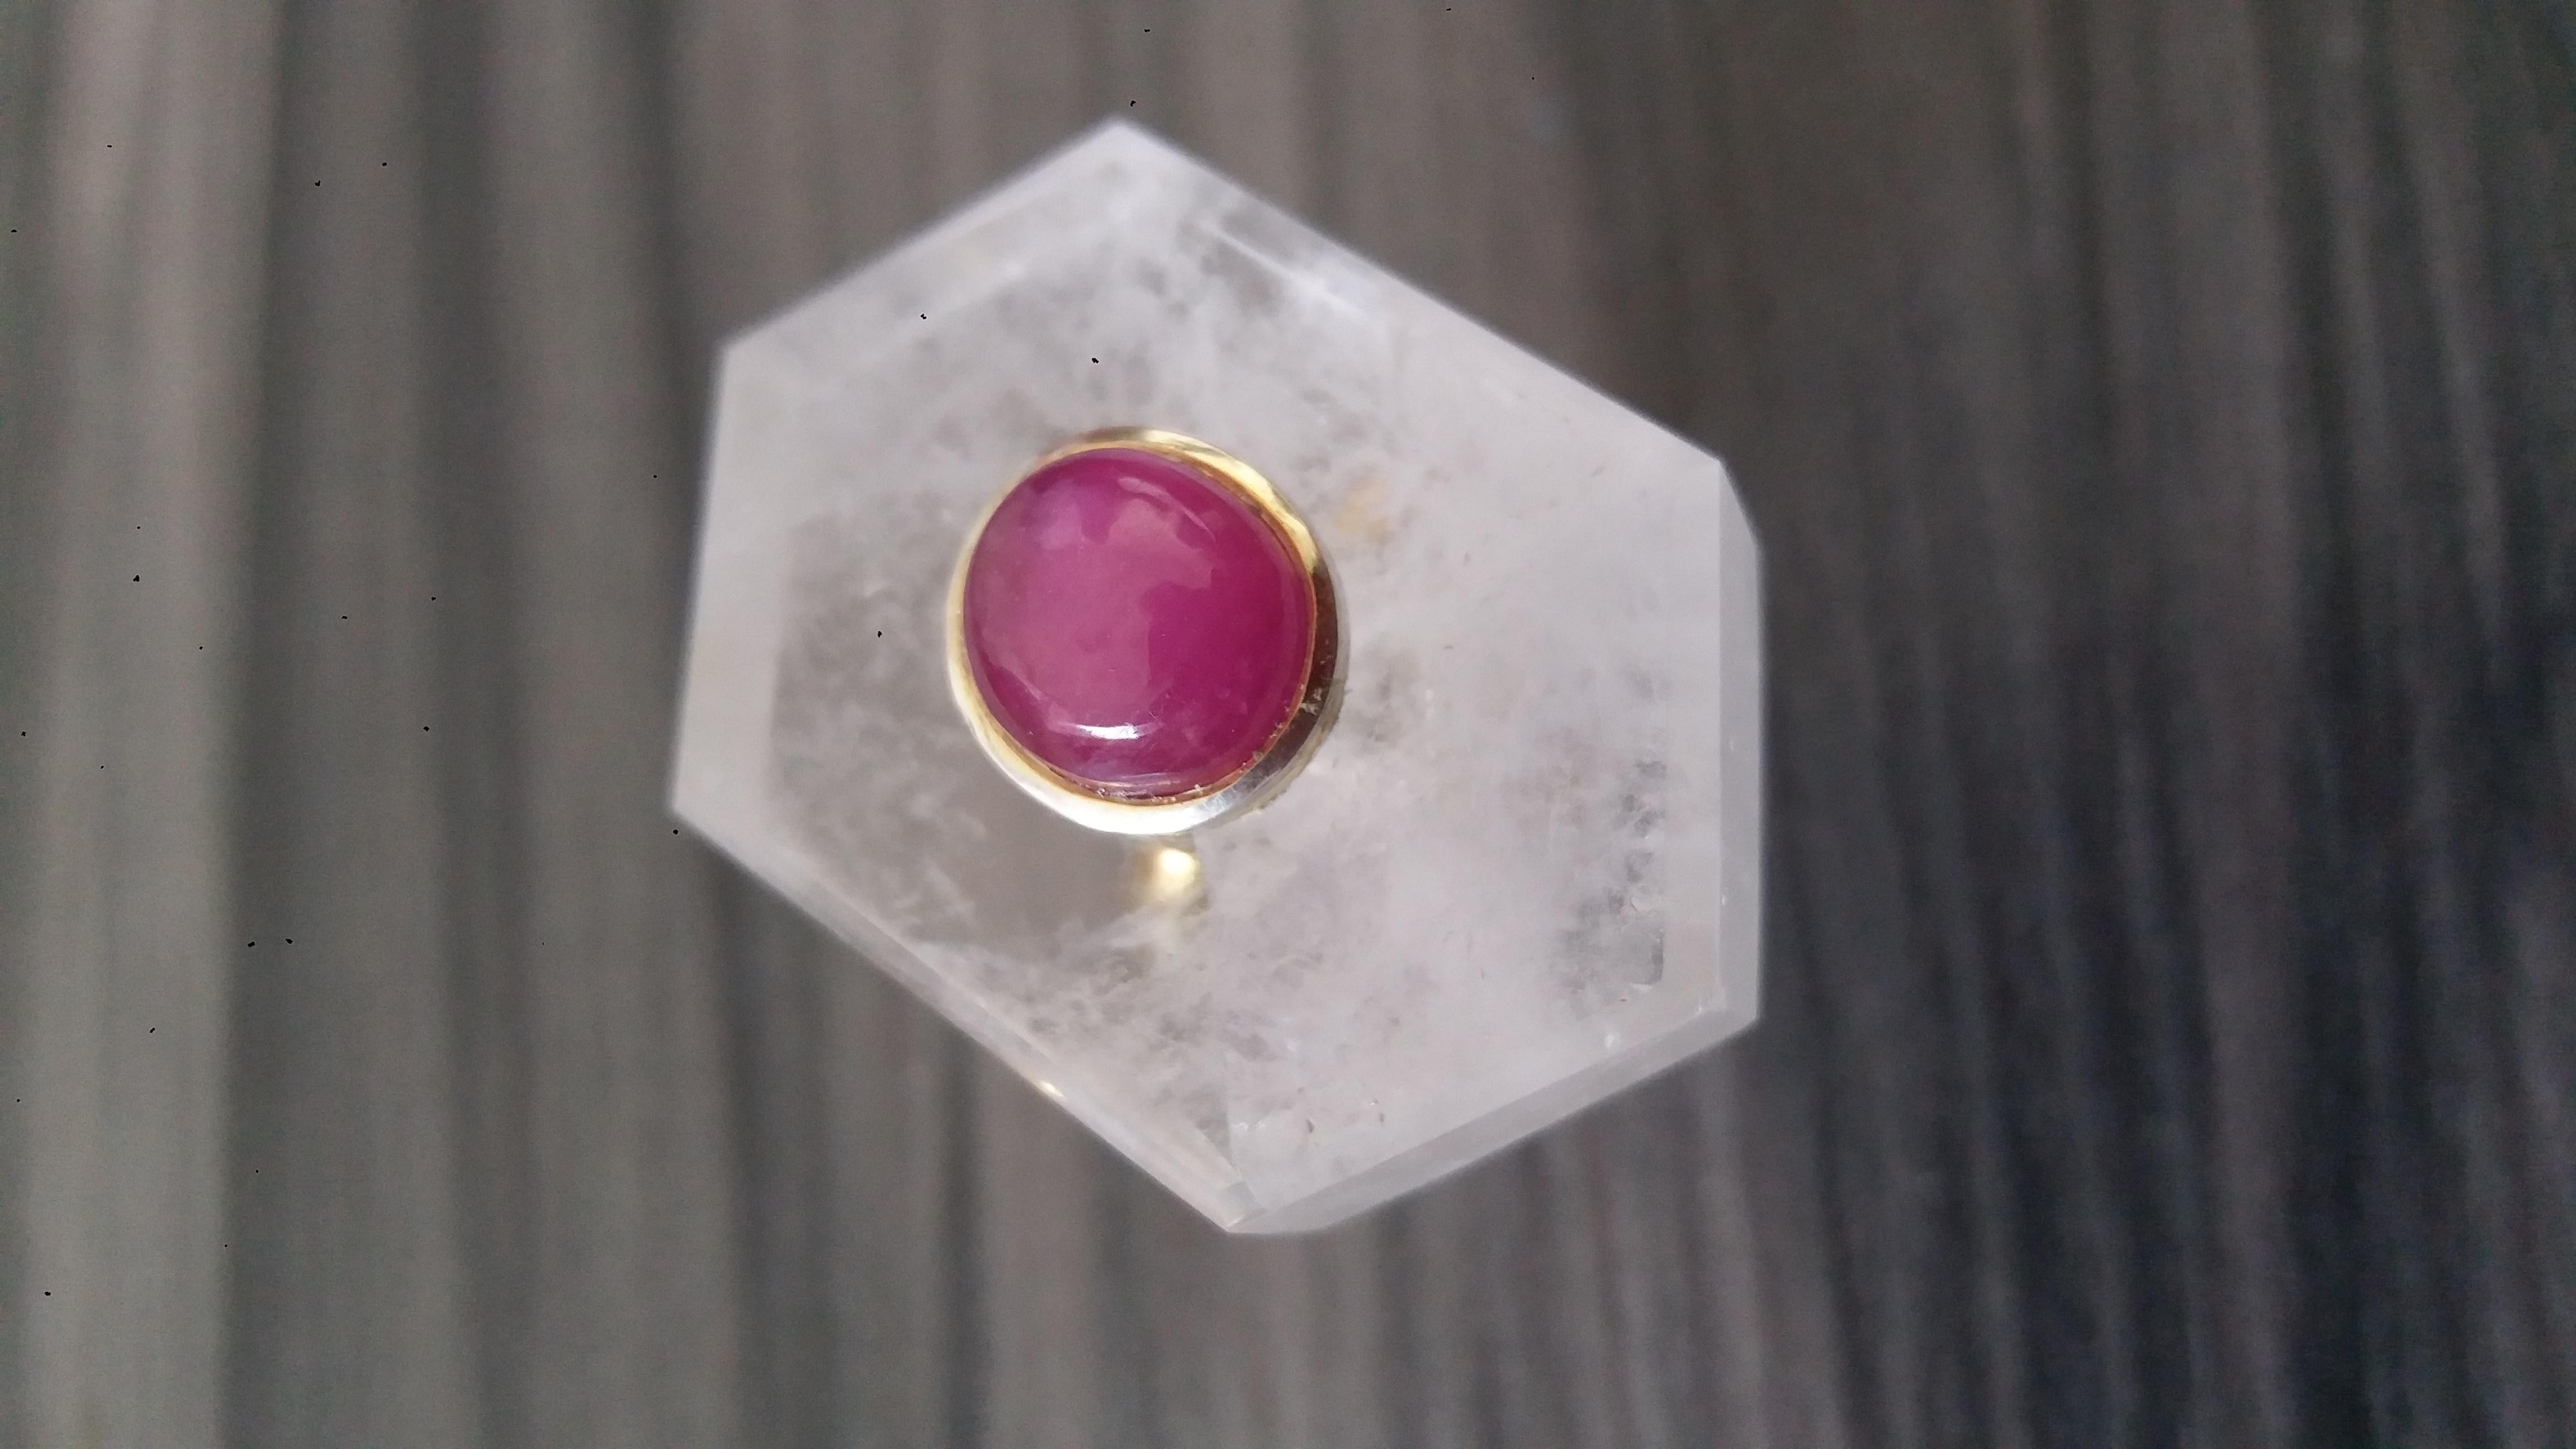 Unique ring with an Hexagon shape Natural  Rock Crystal (Quartz) ,measuring 32 mm. x 22 mm x 10 mm. and weighing 68 Carats with a nice Oval Ruby Cabochon measuring 8 mm x 10 mm set in 14 kt yellow gold...Ring shank is also in 14 kt  solid yellow